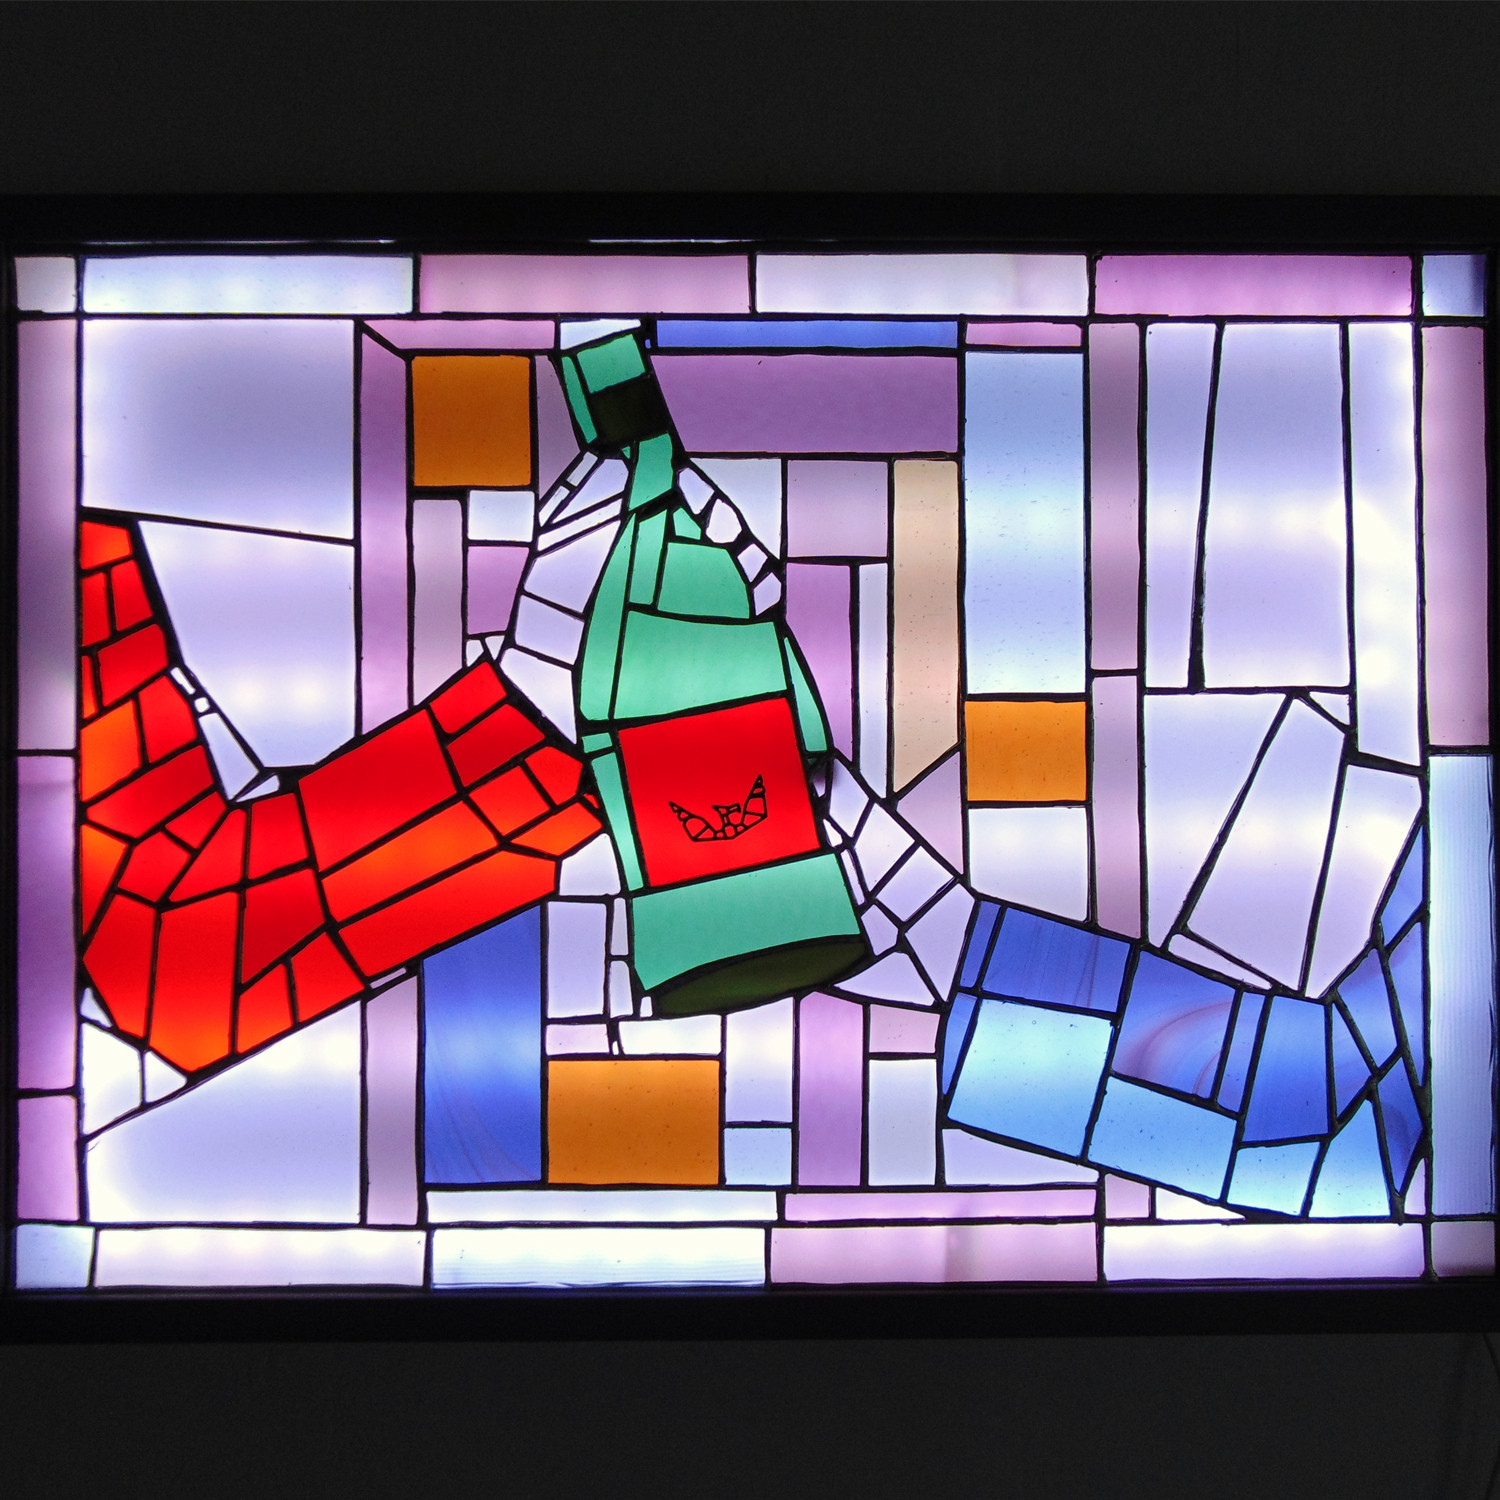 *The Phoenix Club opening*, stained glass installed in light box